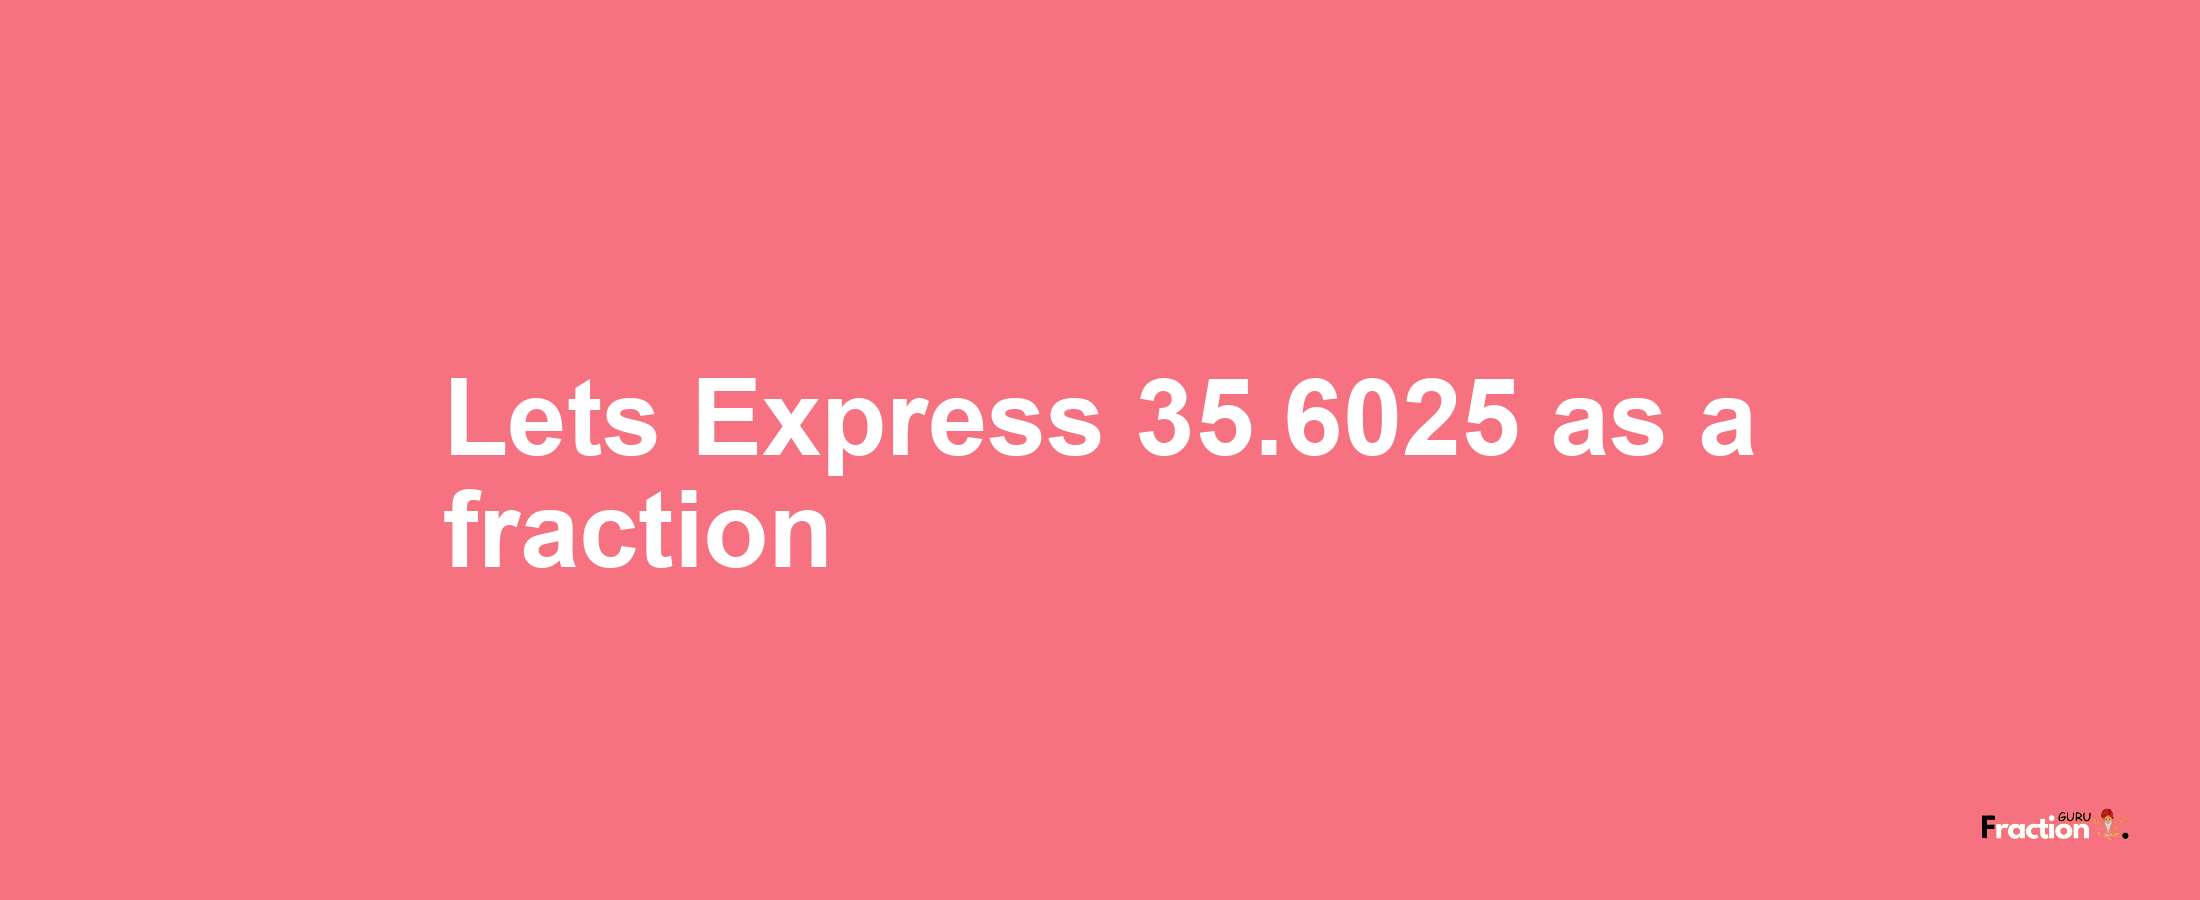 Lets Express 35.6025 as afraction